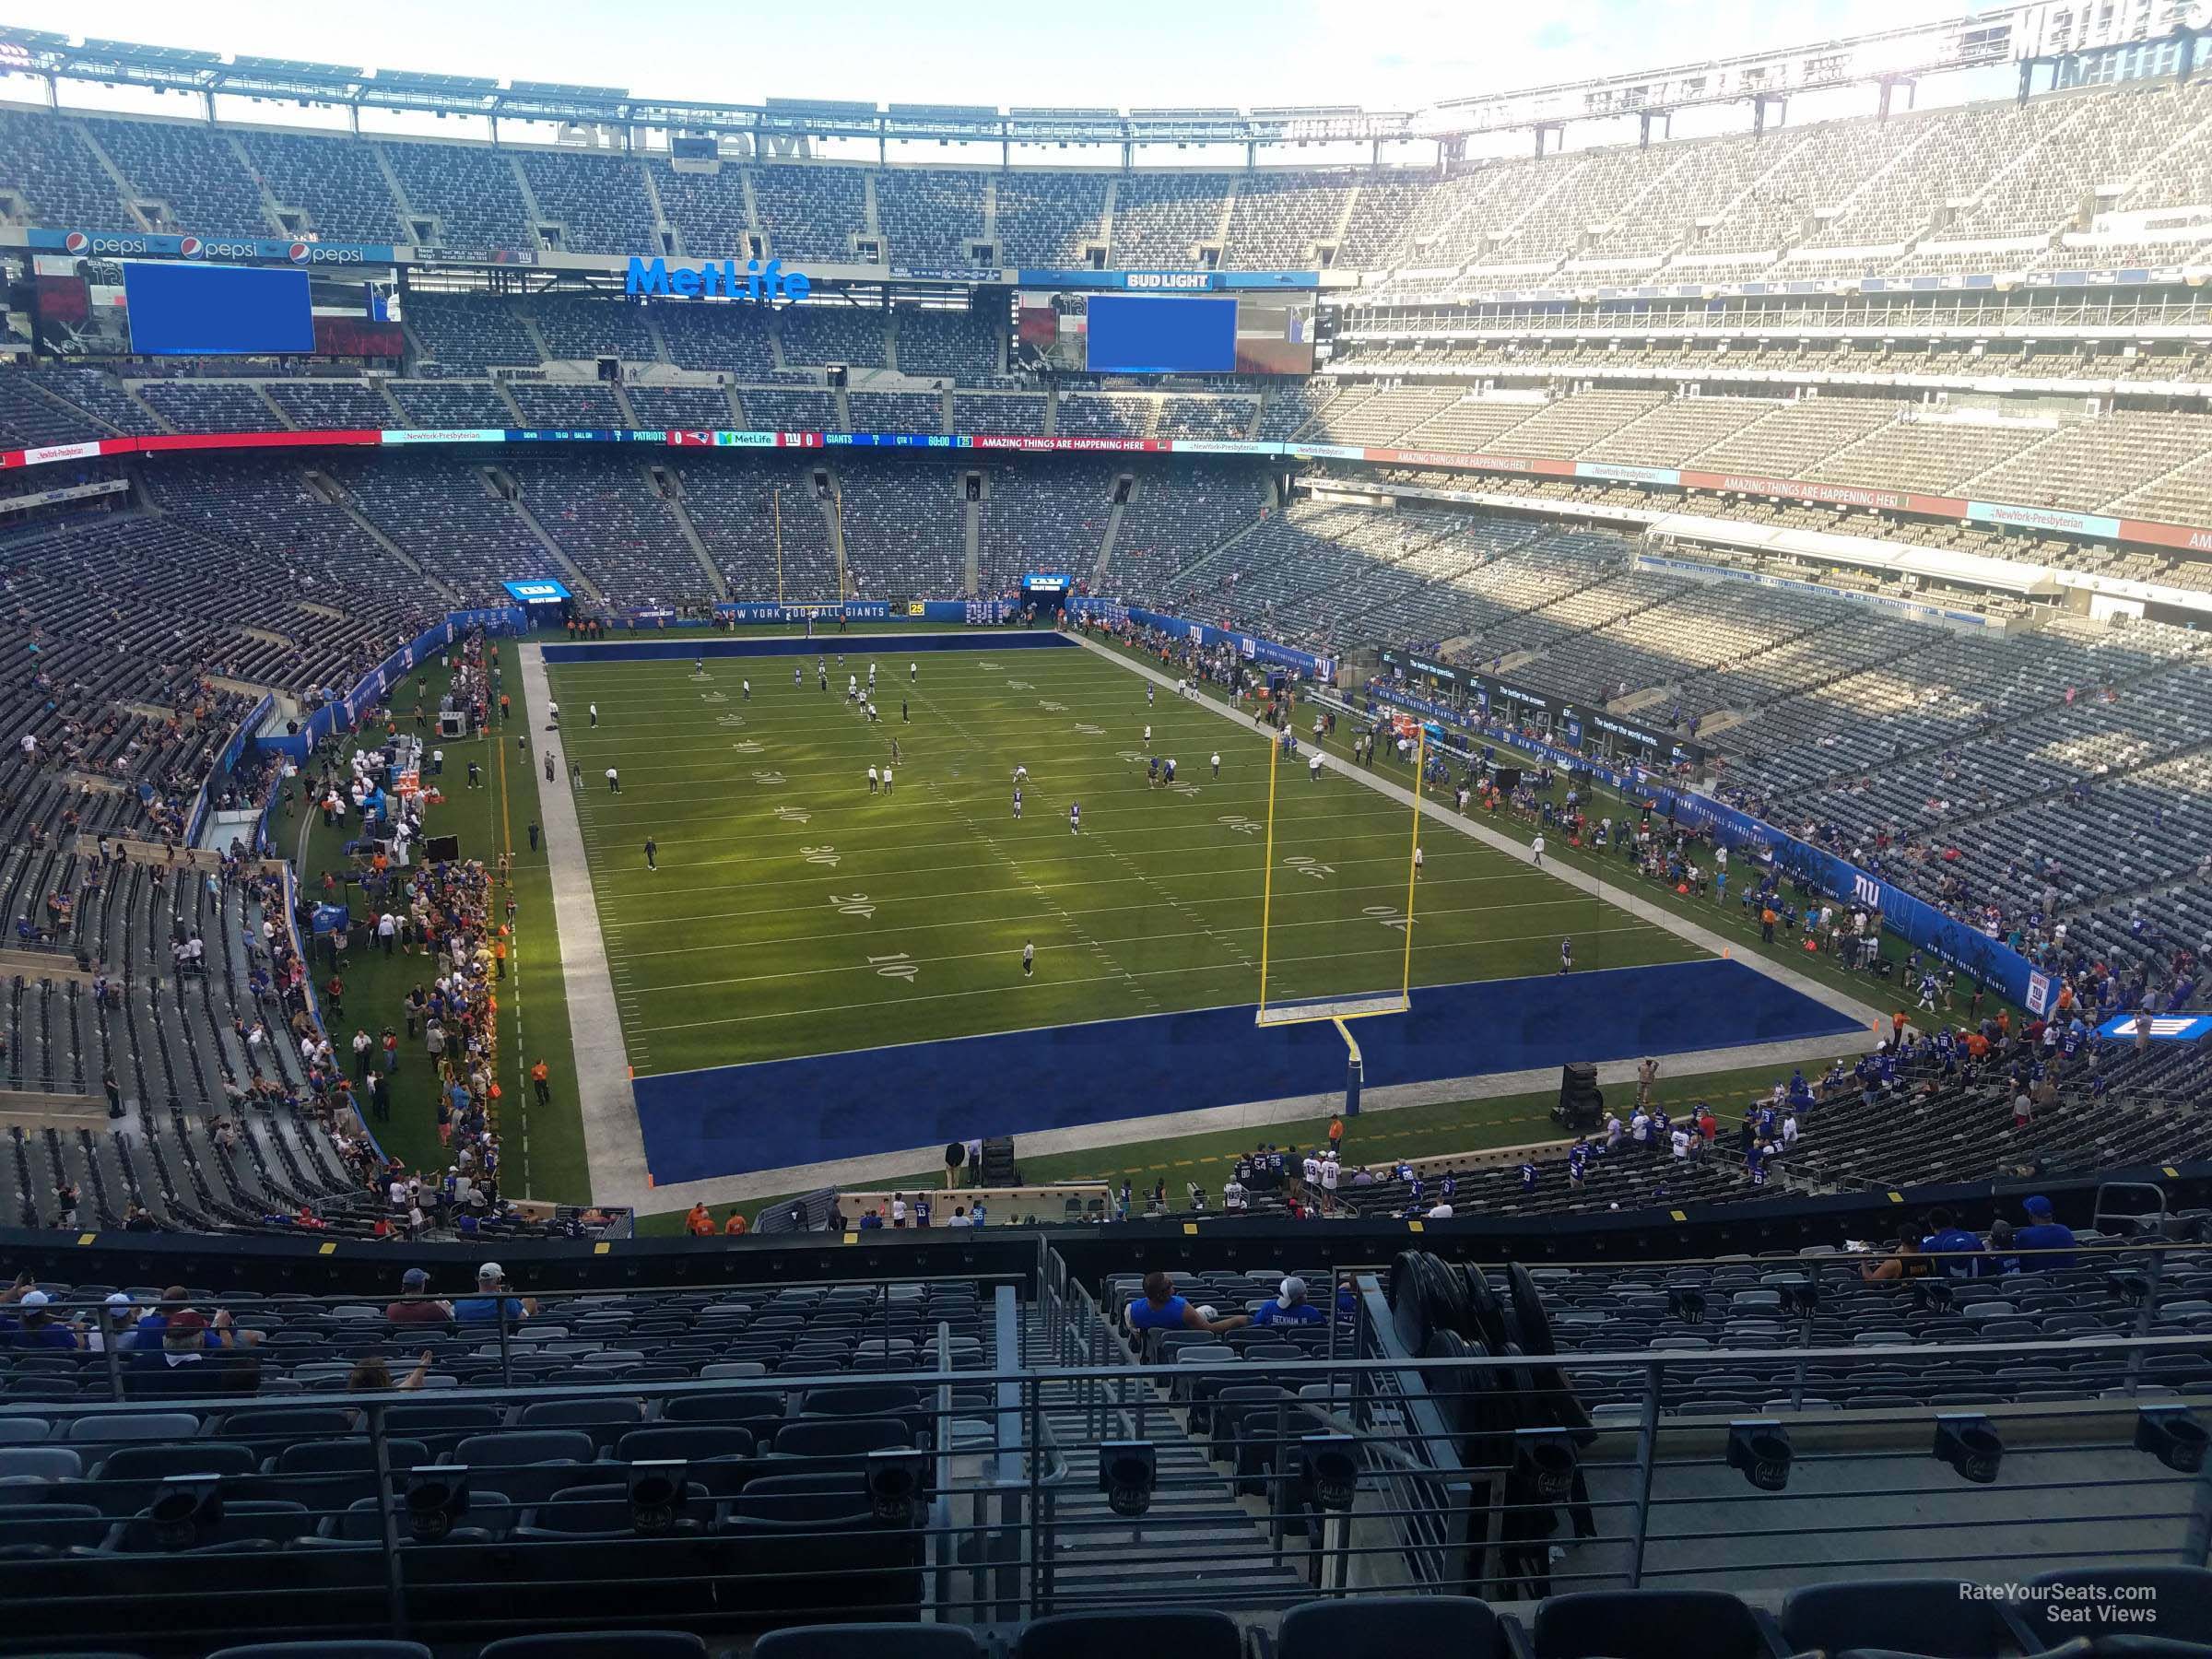 section 228b, row 5 seat view  for football - metlife stadium